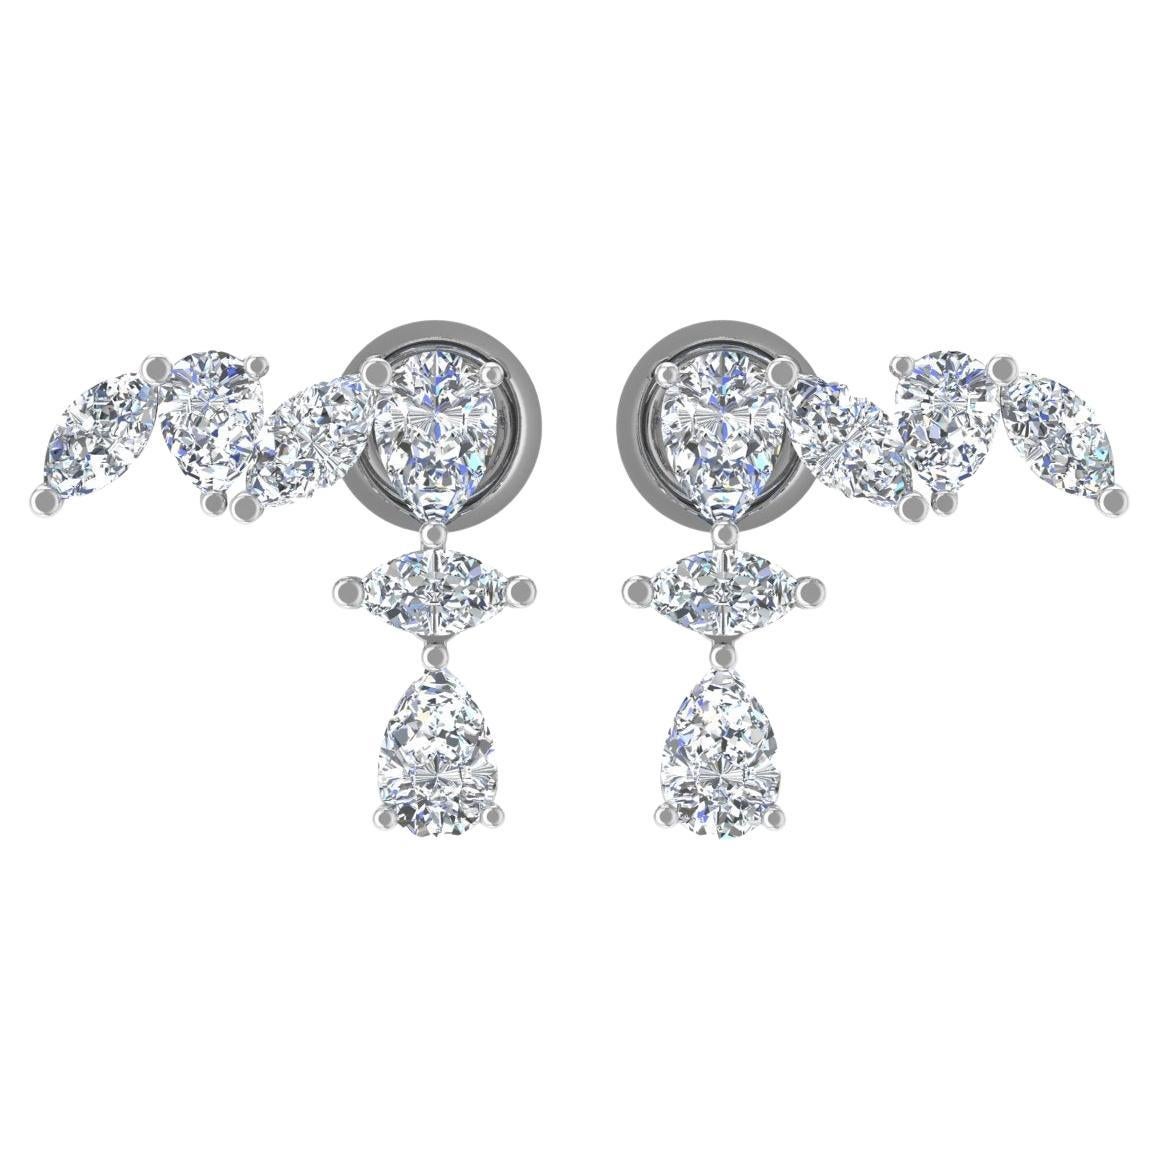 Natural 2.91 Carat Marquise & Pear Diamond Earrings 14 Karat White Gold Jewelry For Sale